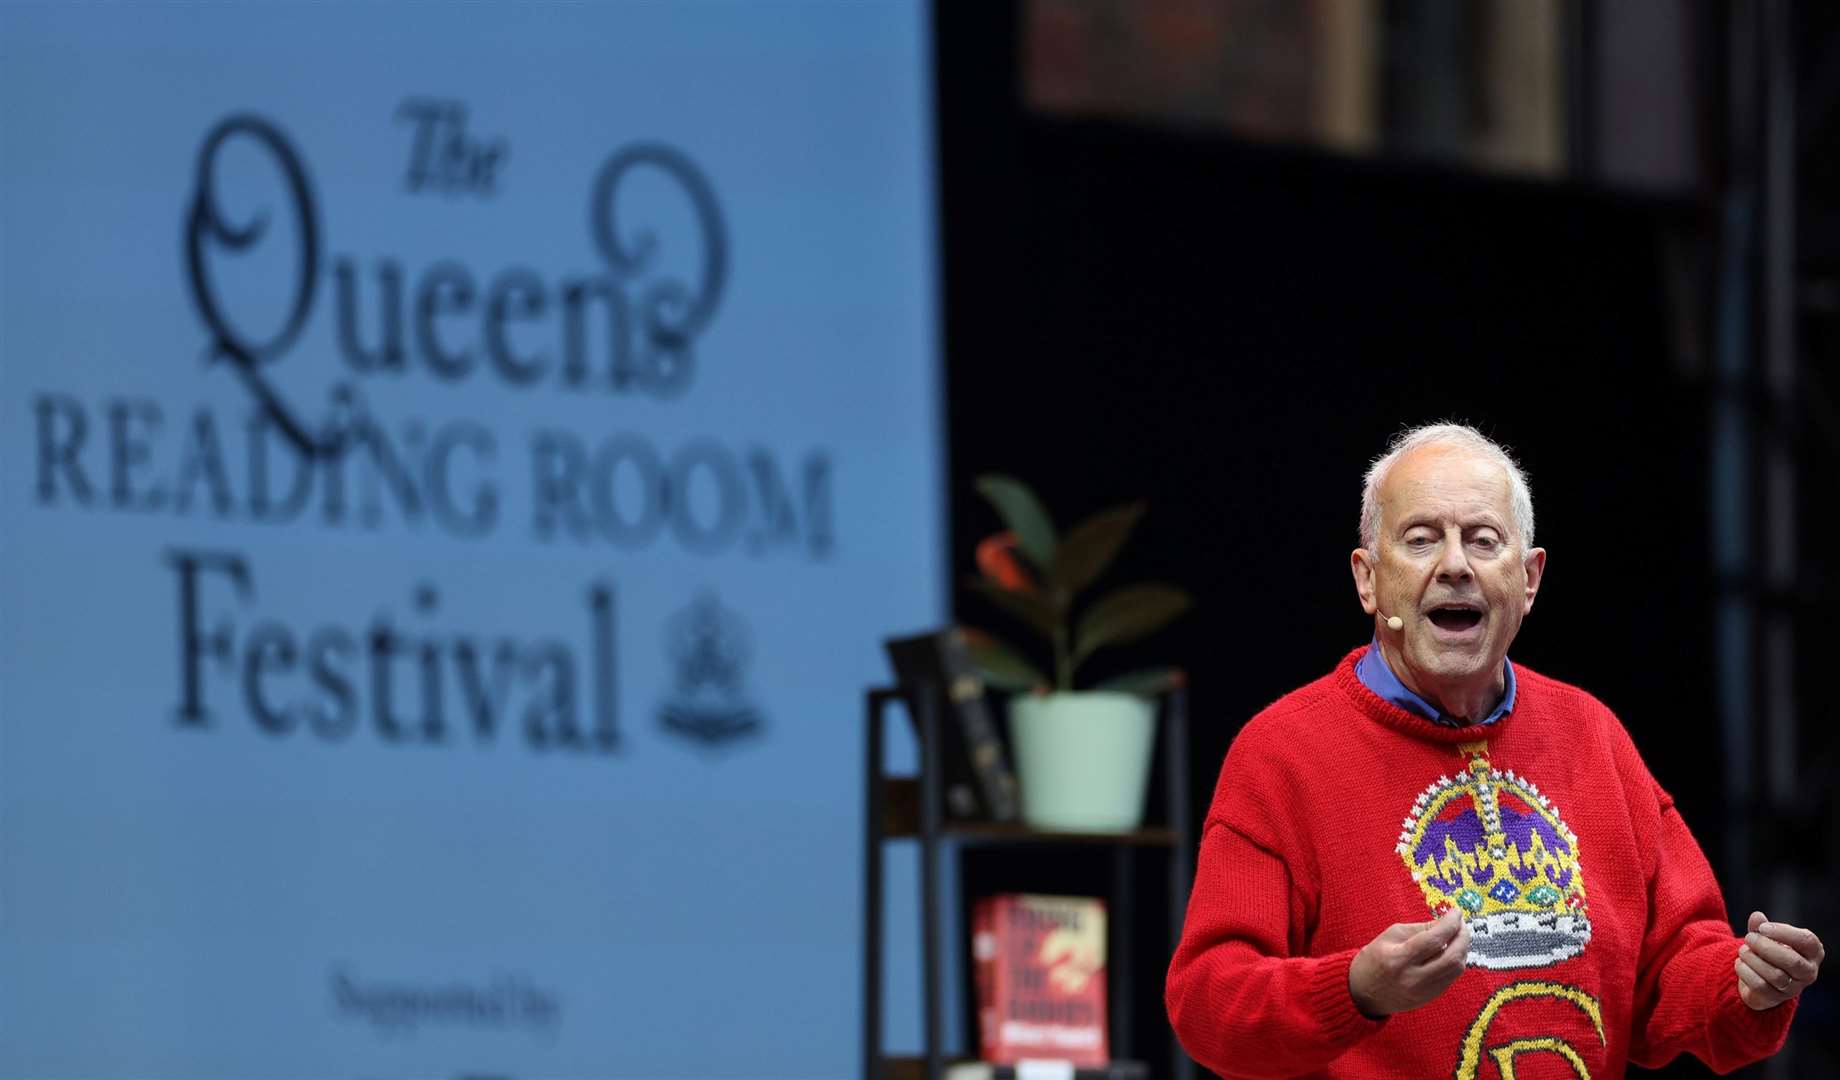 Gyles Brandreth appeared at the festival (Adrian Dennis/PA)